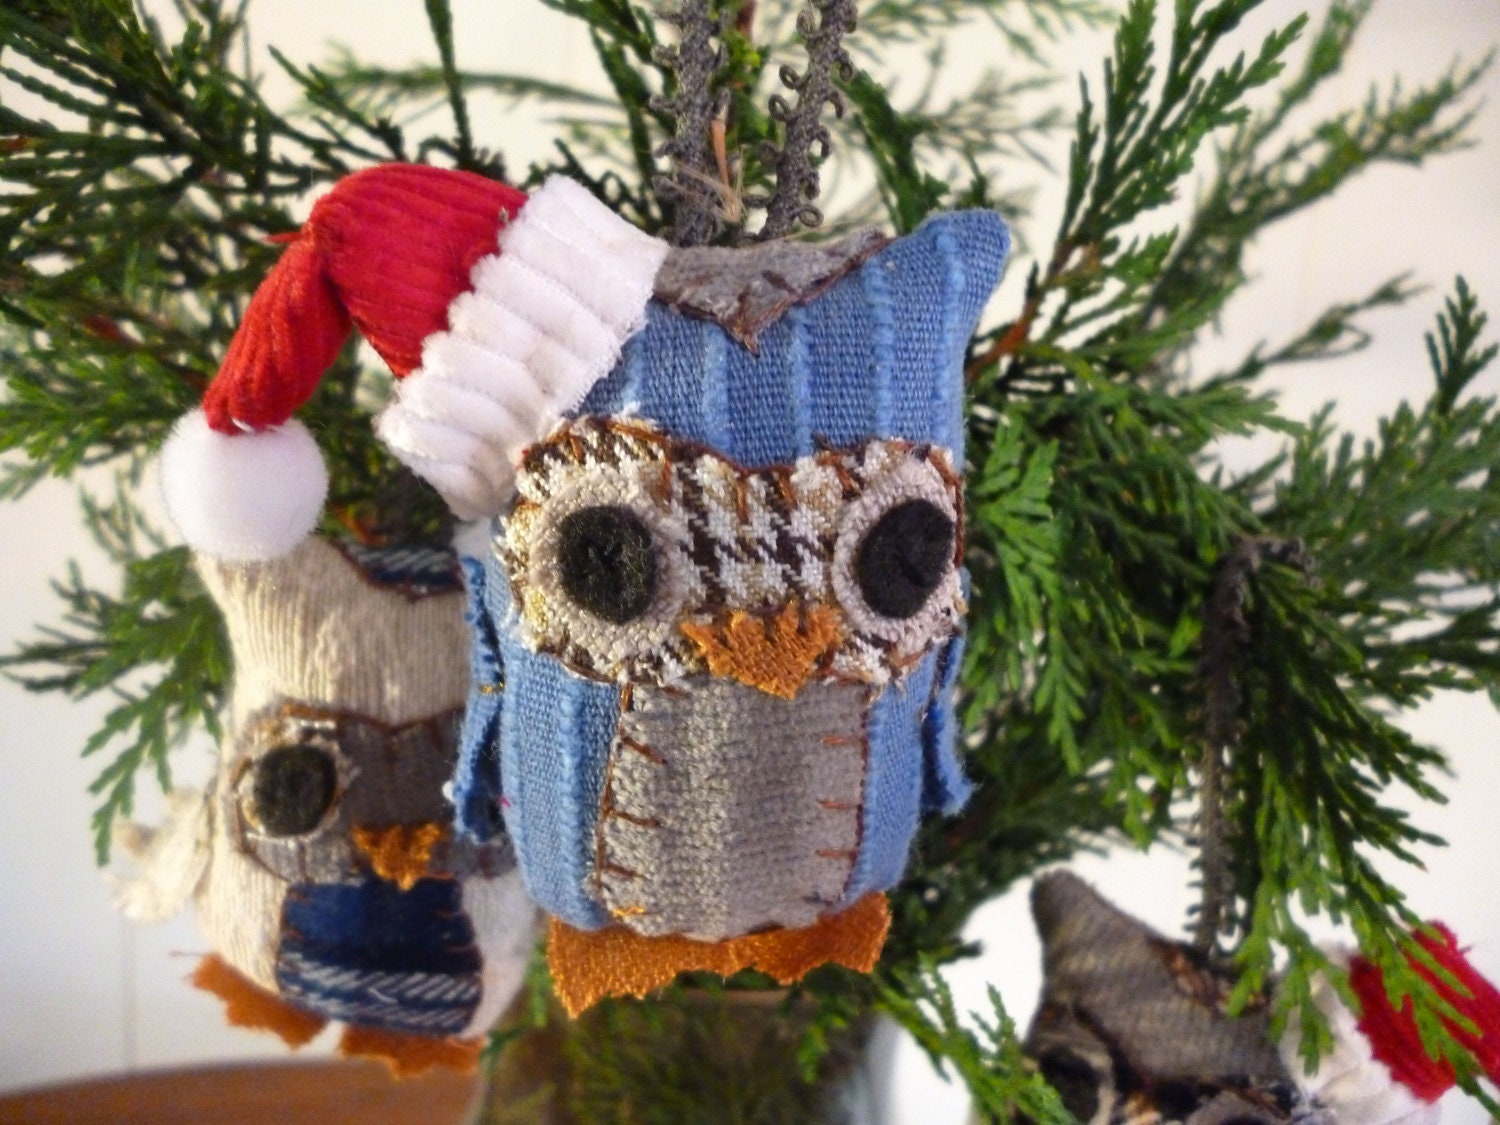 Assorted Owl Christmas Ornaments - 3 Inch Tall Plush Owl Ornament Made From Re-Purposed and Salvaged Fabrics - KayshaK